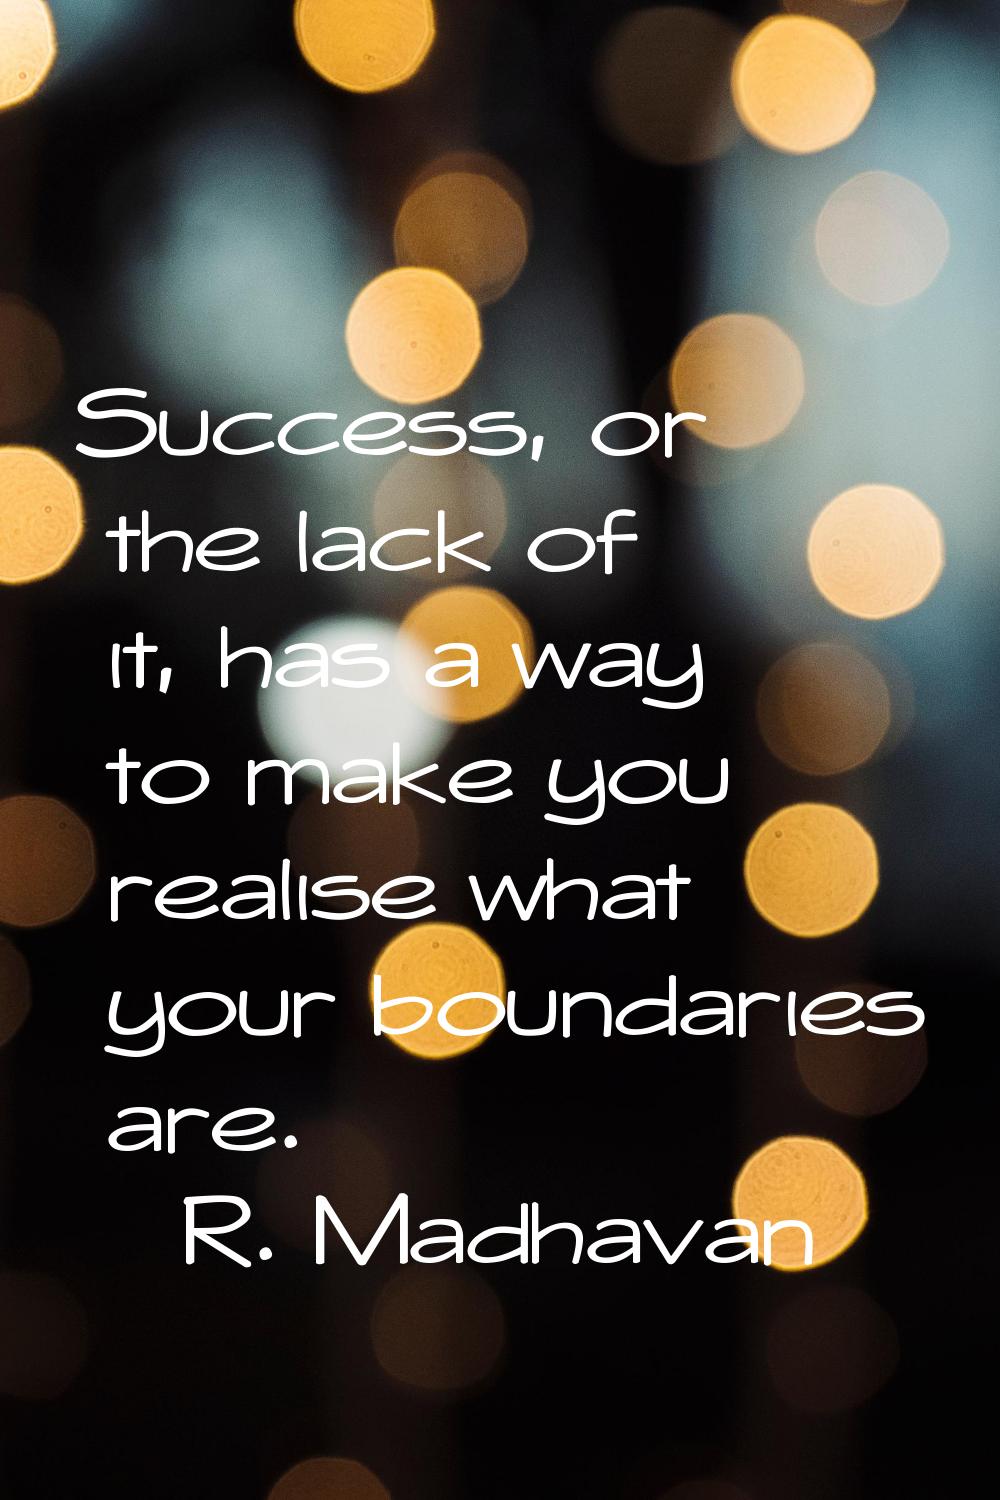 Success, or the lack of it, has a way to make you realise what your boundaries are.